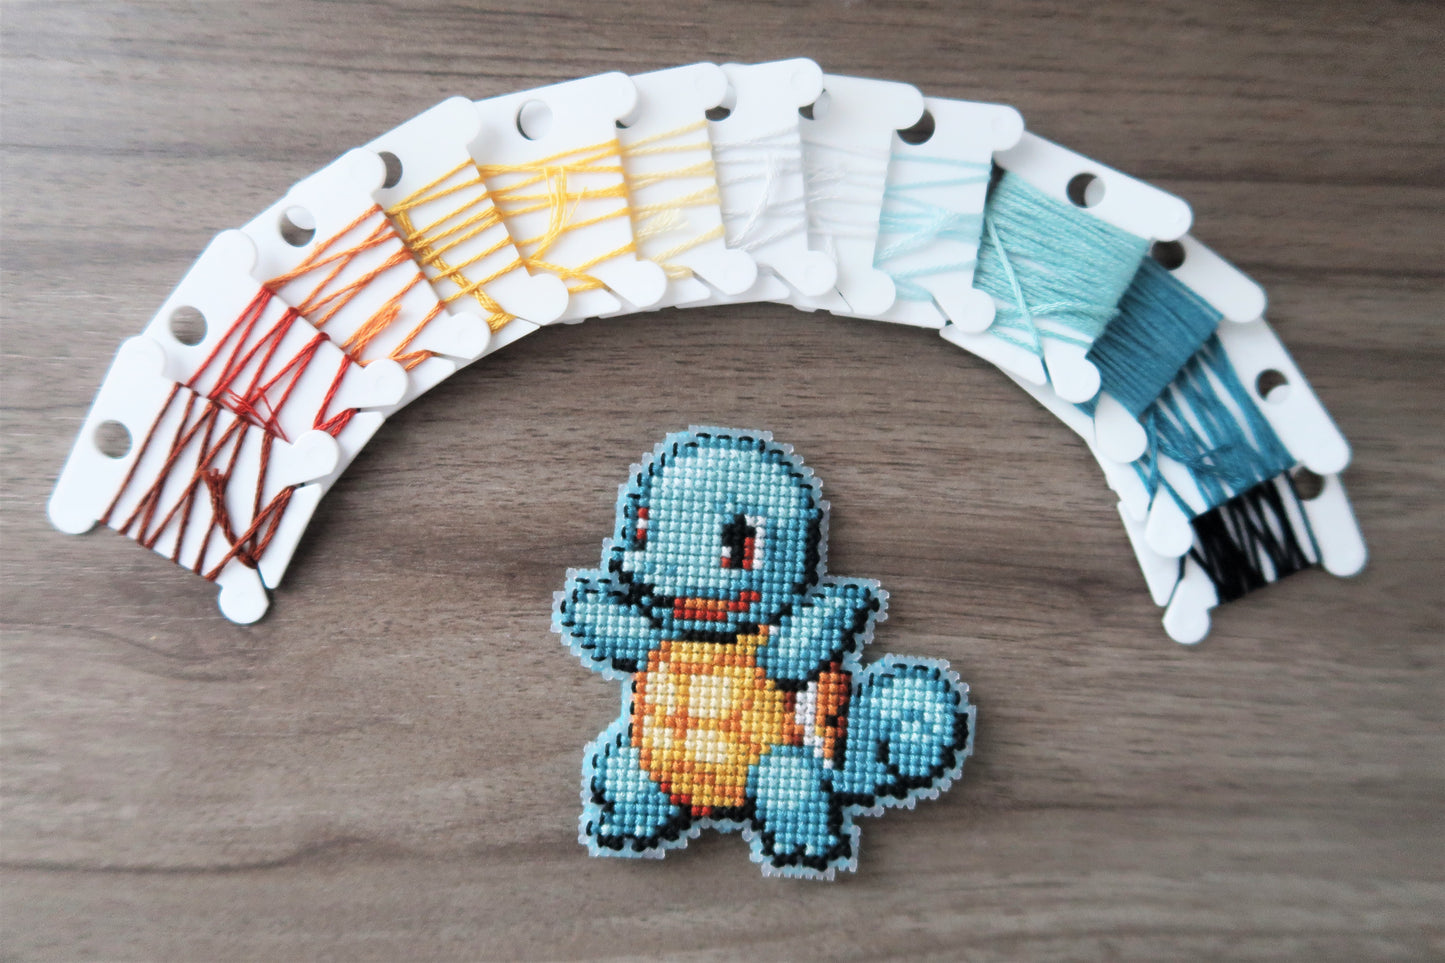 Squirtle from Pokemon - Cross stitch magnet kit